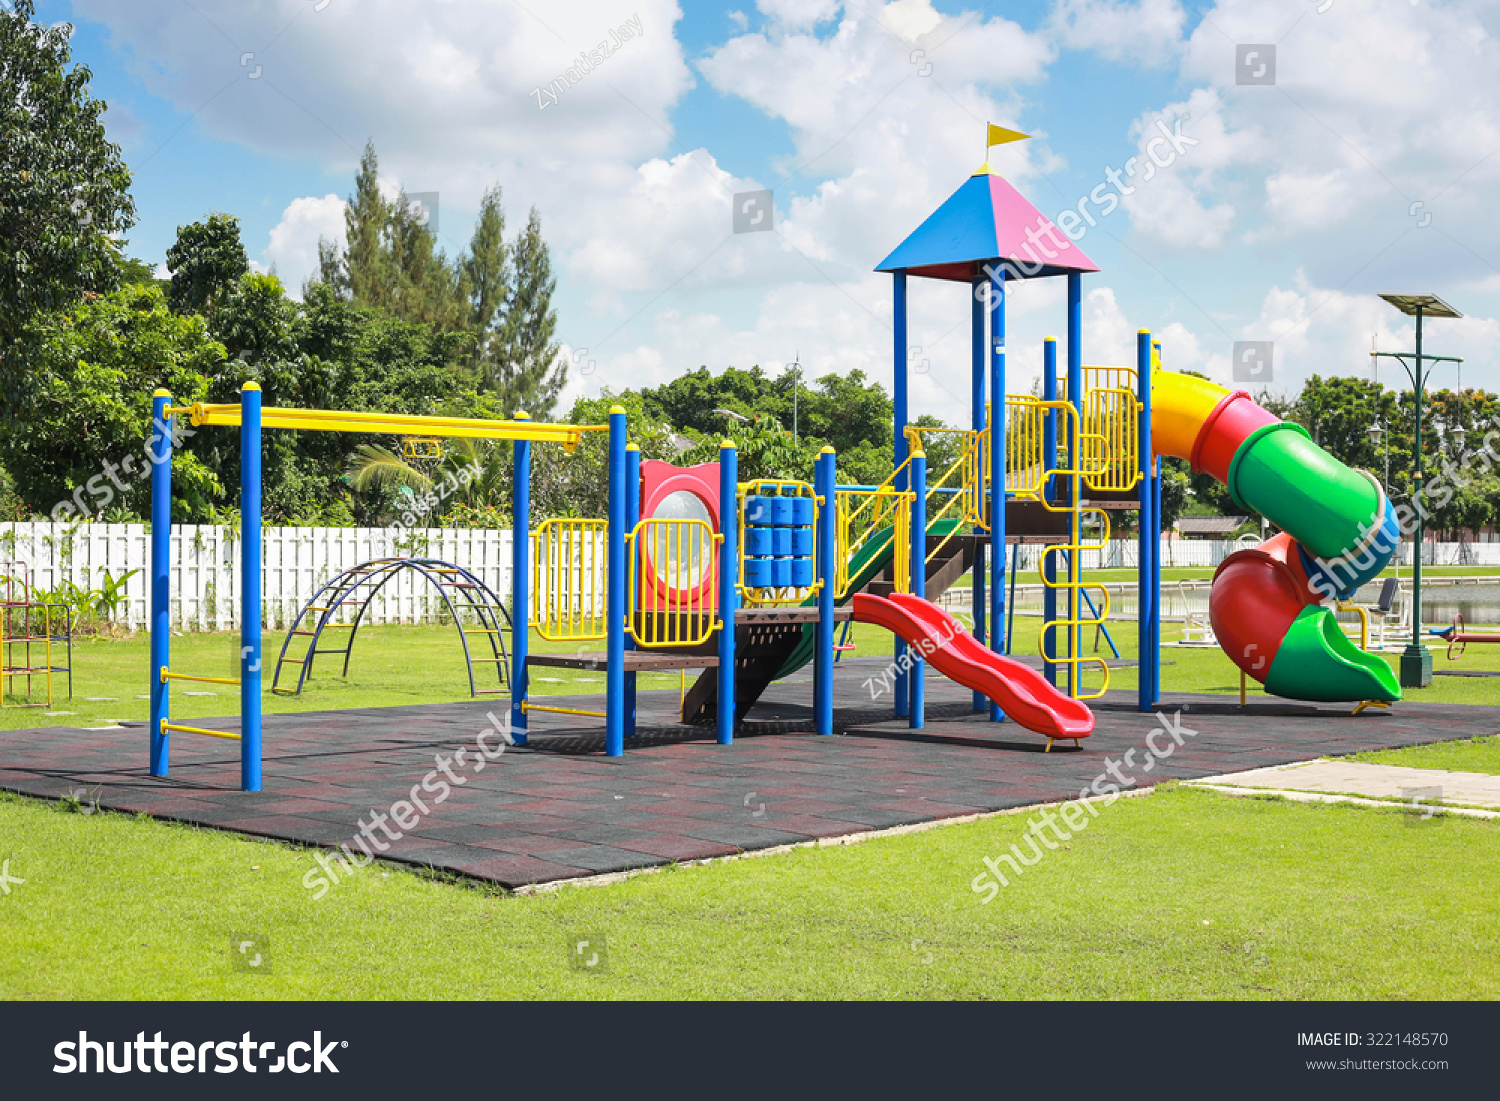 Colorful playground on yard in the park. #322148570